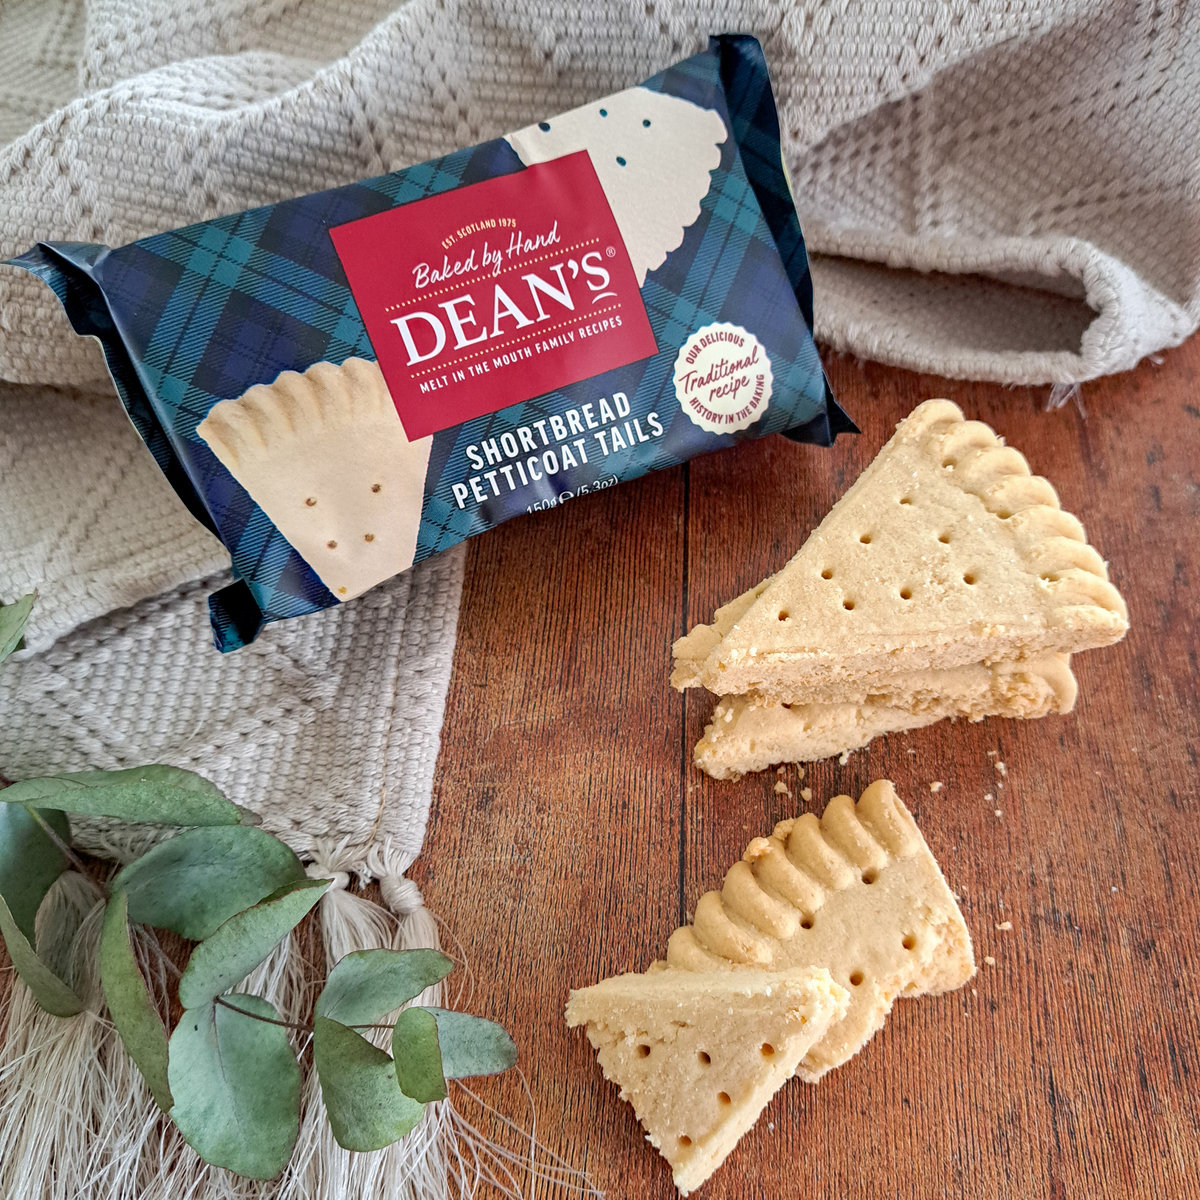 Buy the Shortbread Petticoat Tails 150g online at Dean's